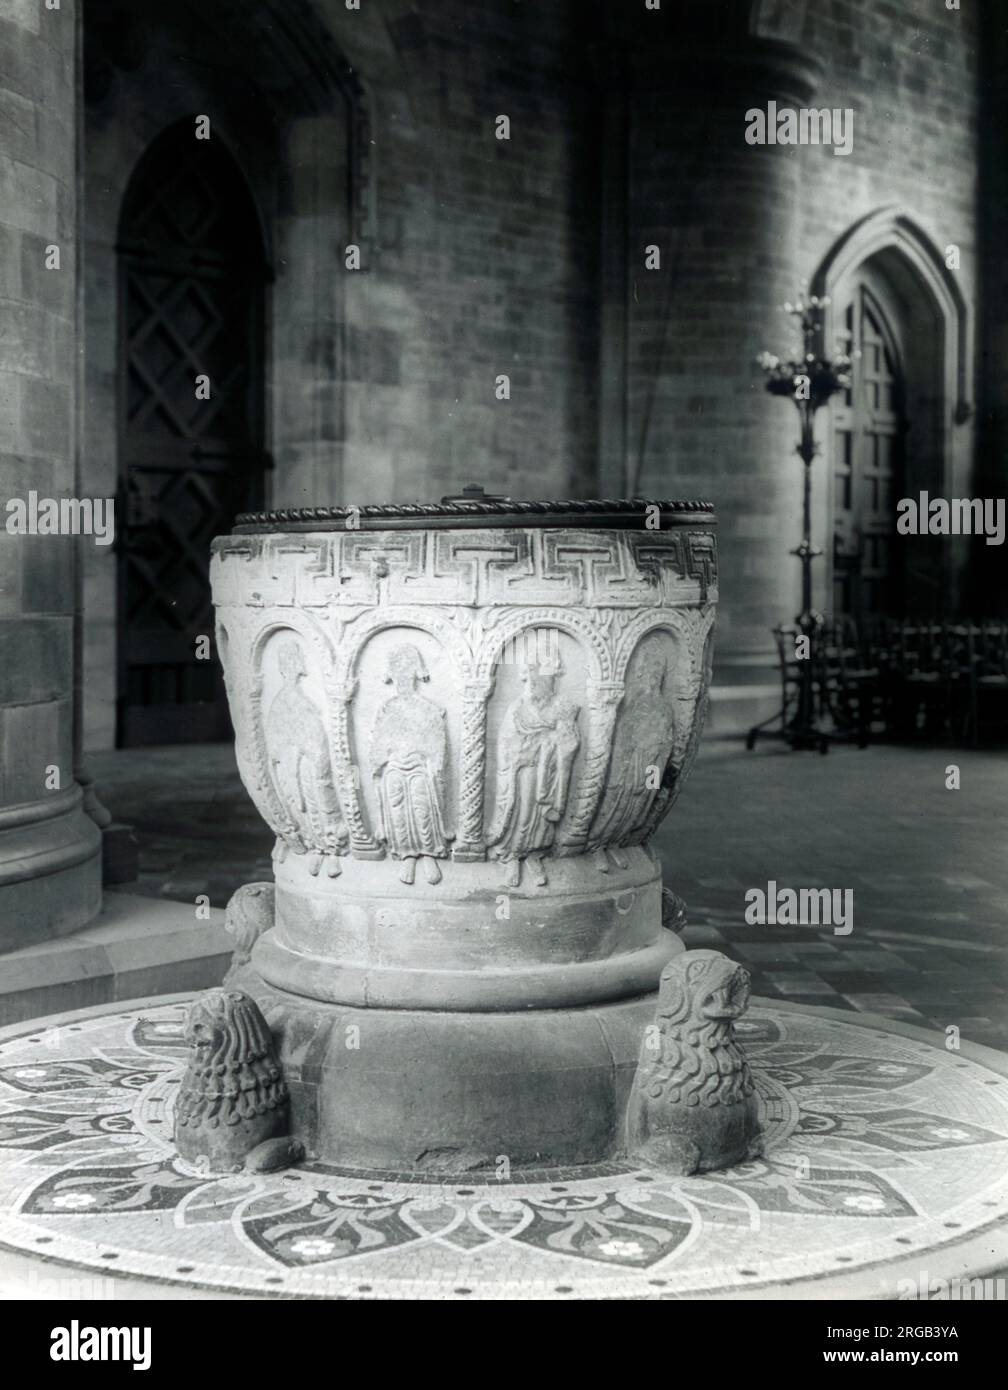 Font, Cattedrale di Hereford, Herefordshire, Inghilterra Foto Stock